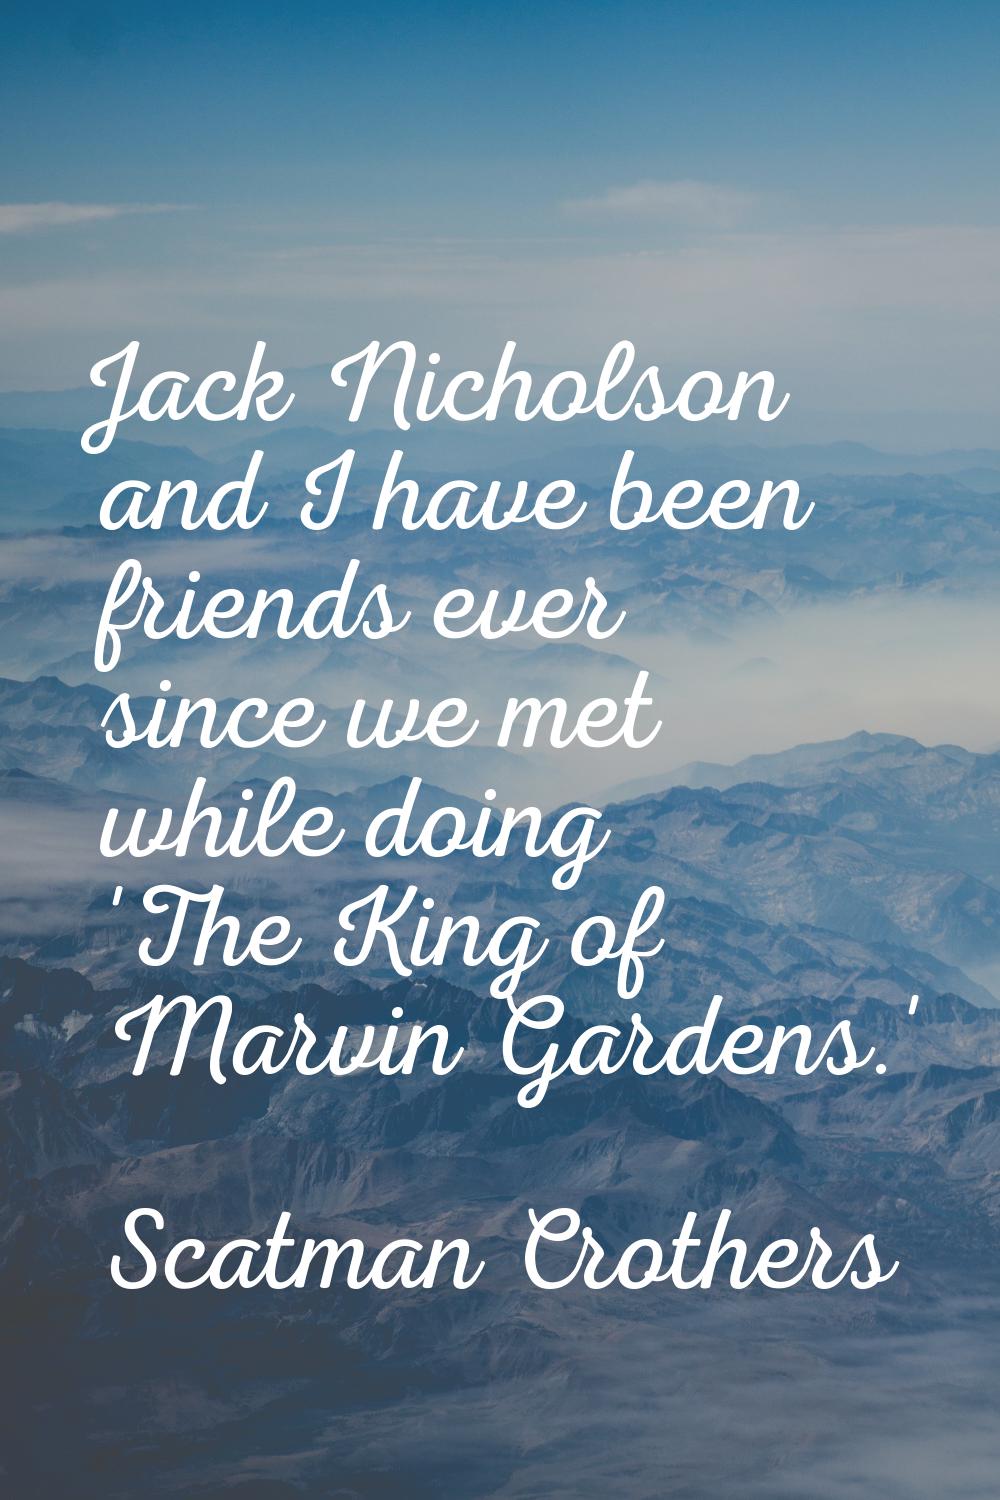 Jack Nicholson and I have been friends ever since we met while doing 'The King of Marvin Gardens.'